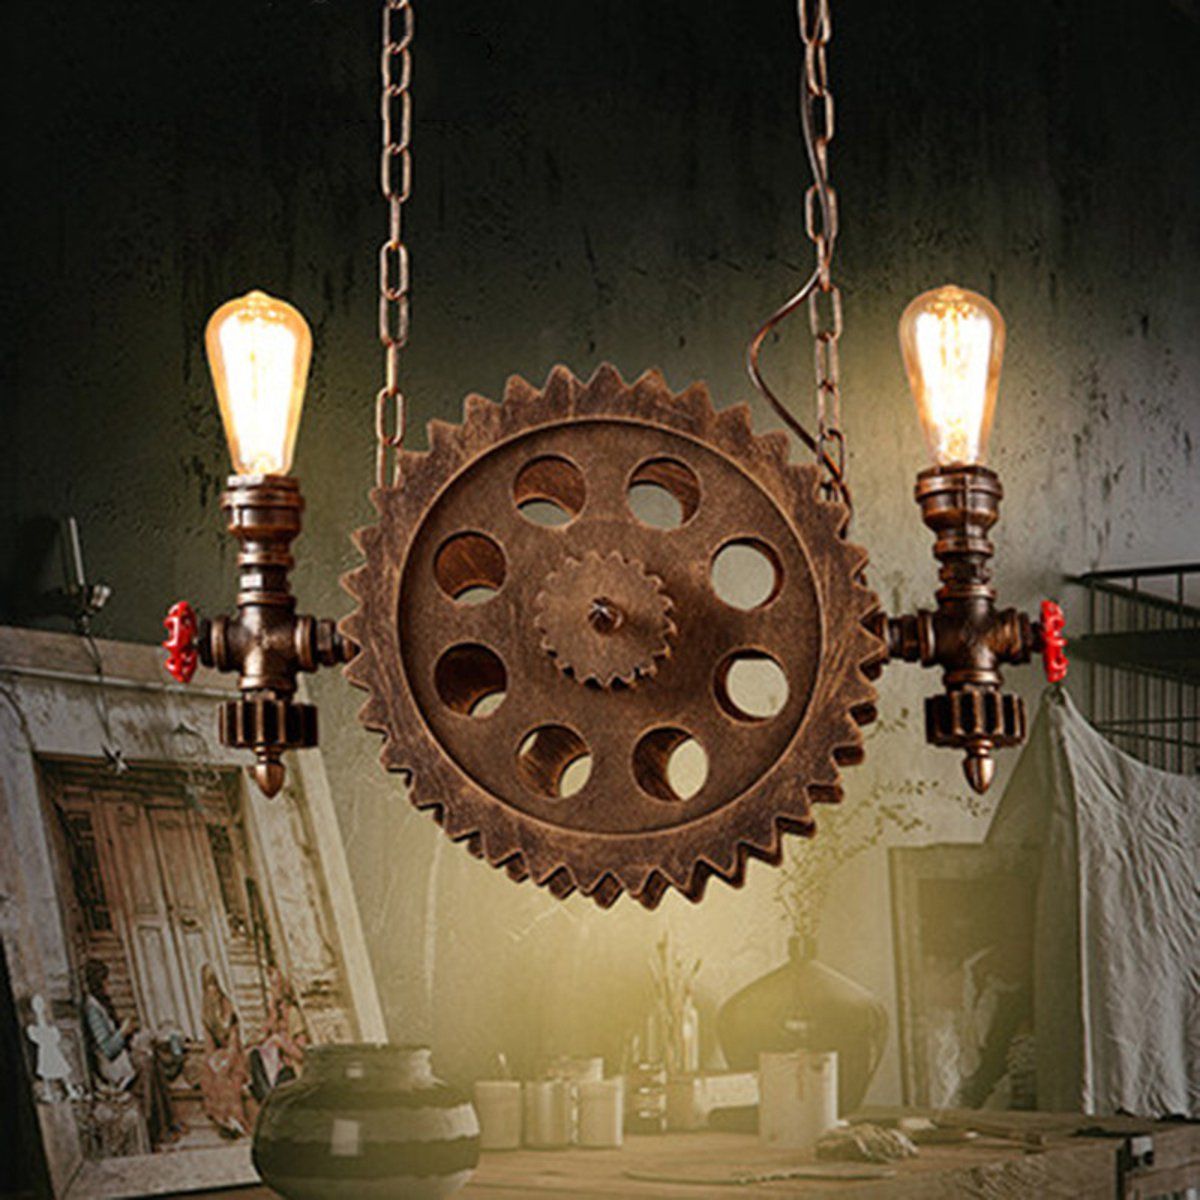 Antique-Style-Rust-Metal-Gear-2-Bare-Bulbs-Waterpipe-Ceiling-Pendant-Light-without-Blub-1556607